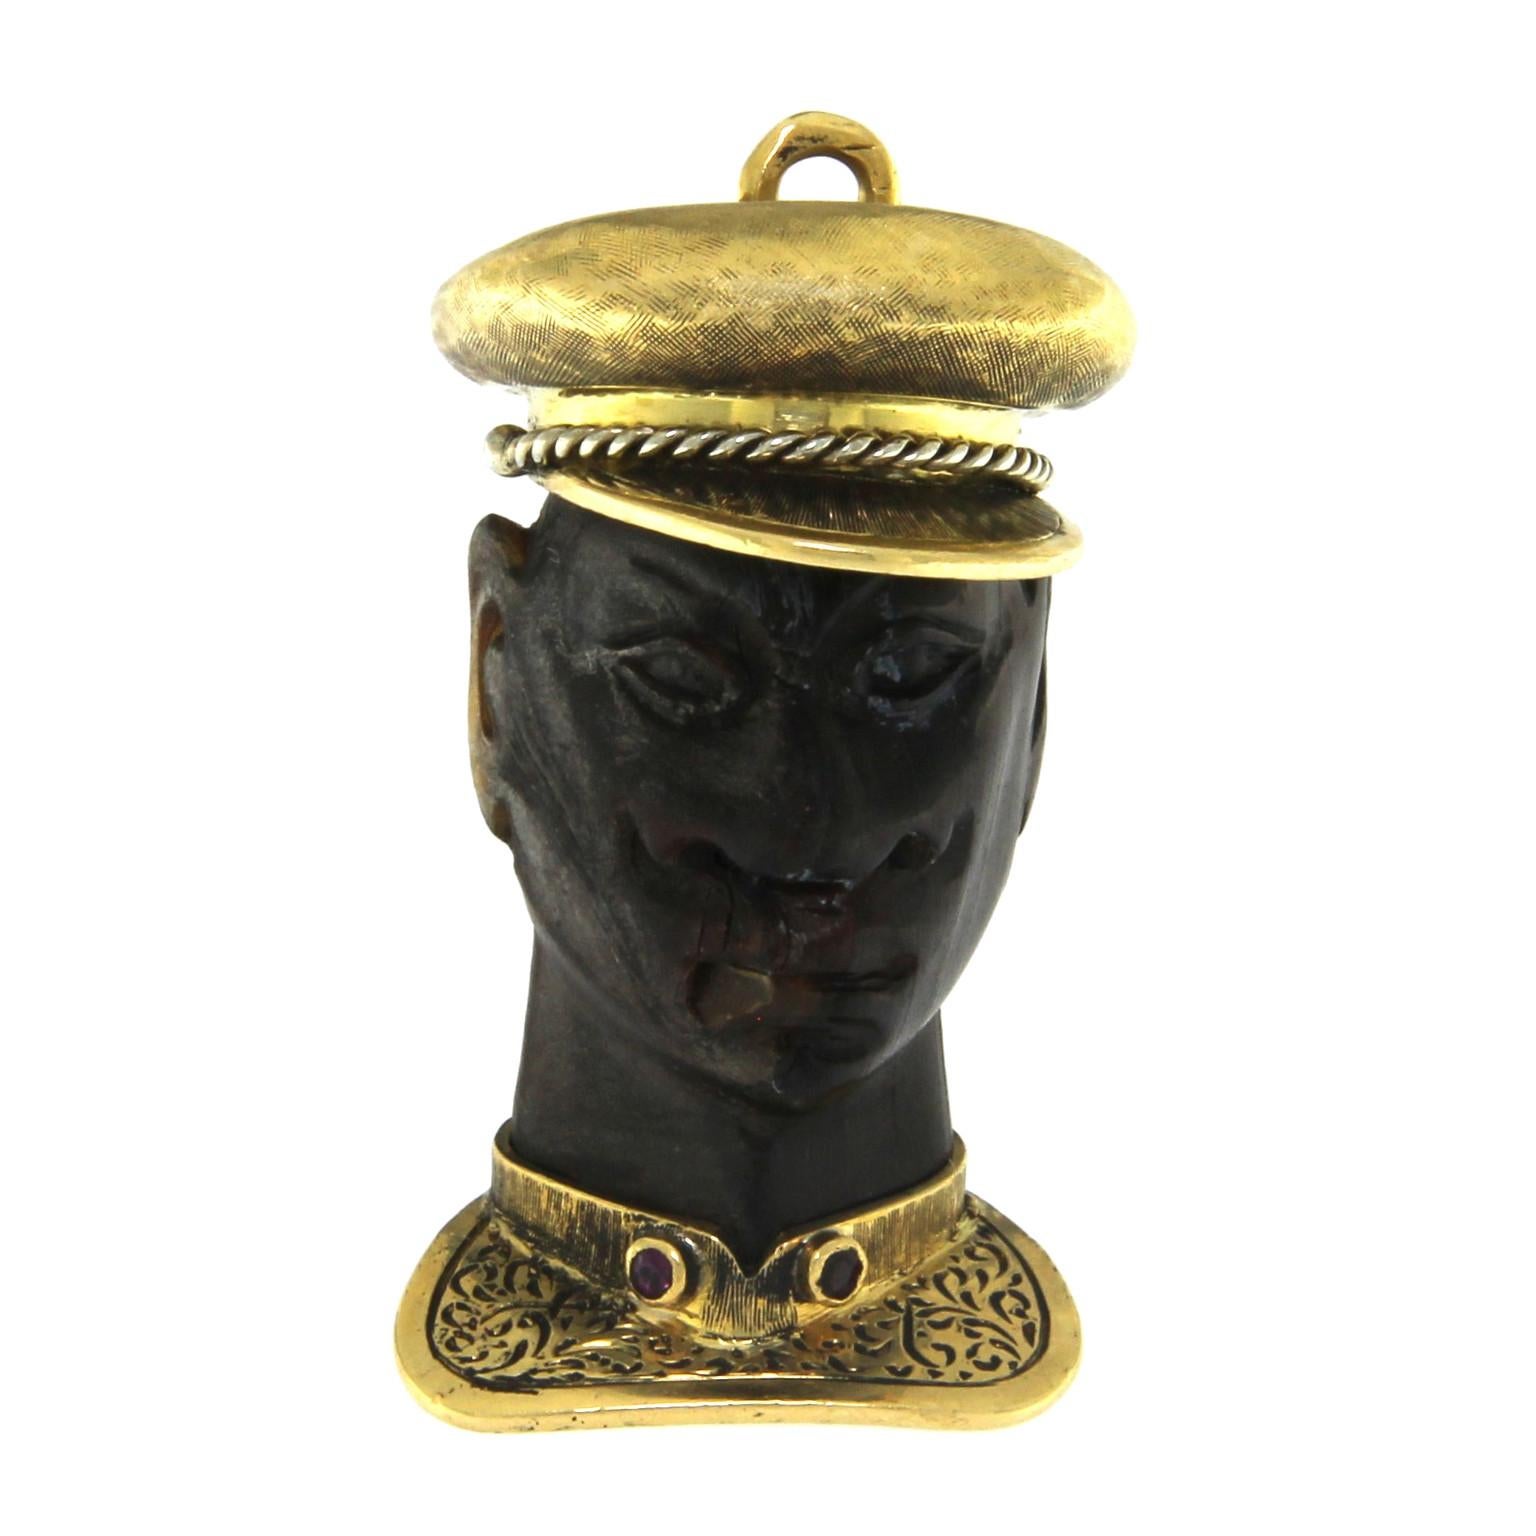 unique pendant 18K yellow gold and ebony

Ebony is engraved representing a male face

total weigh is 15 g